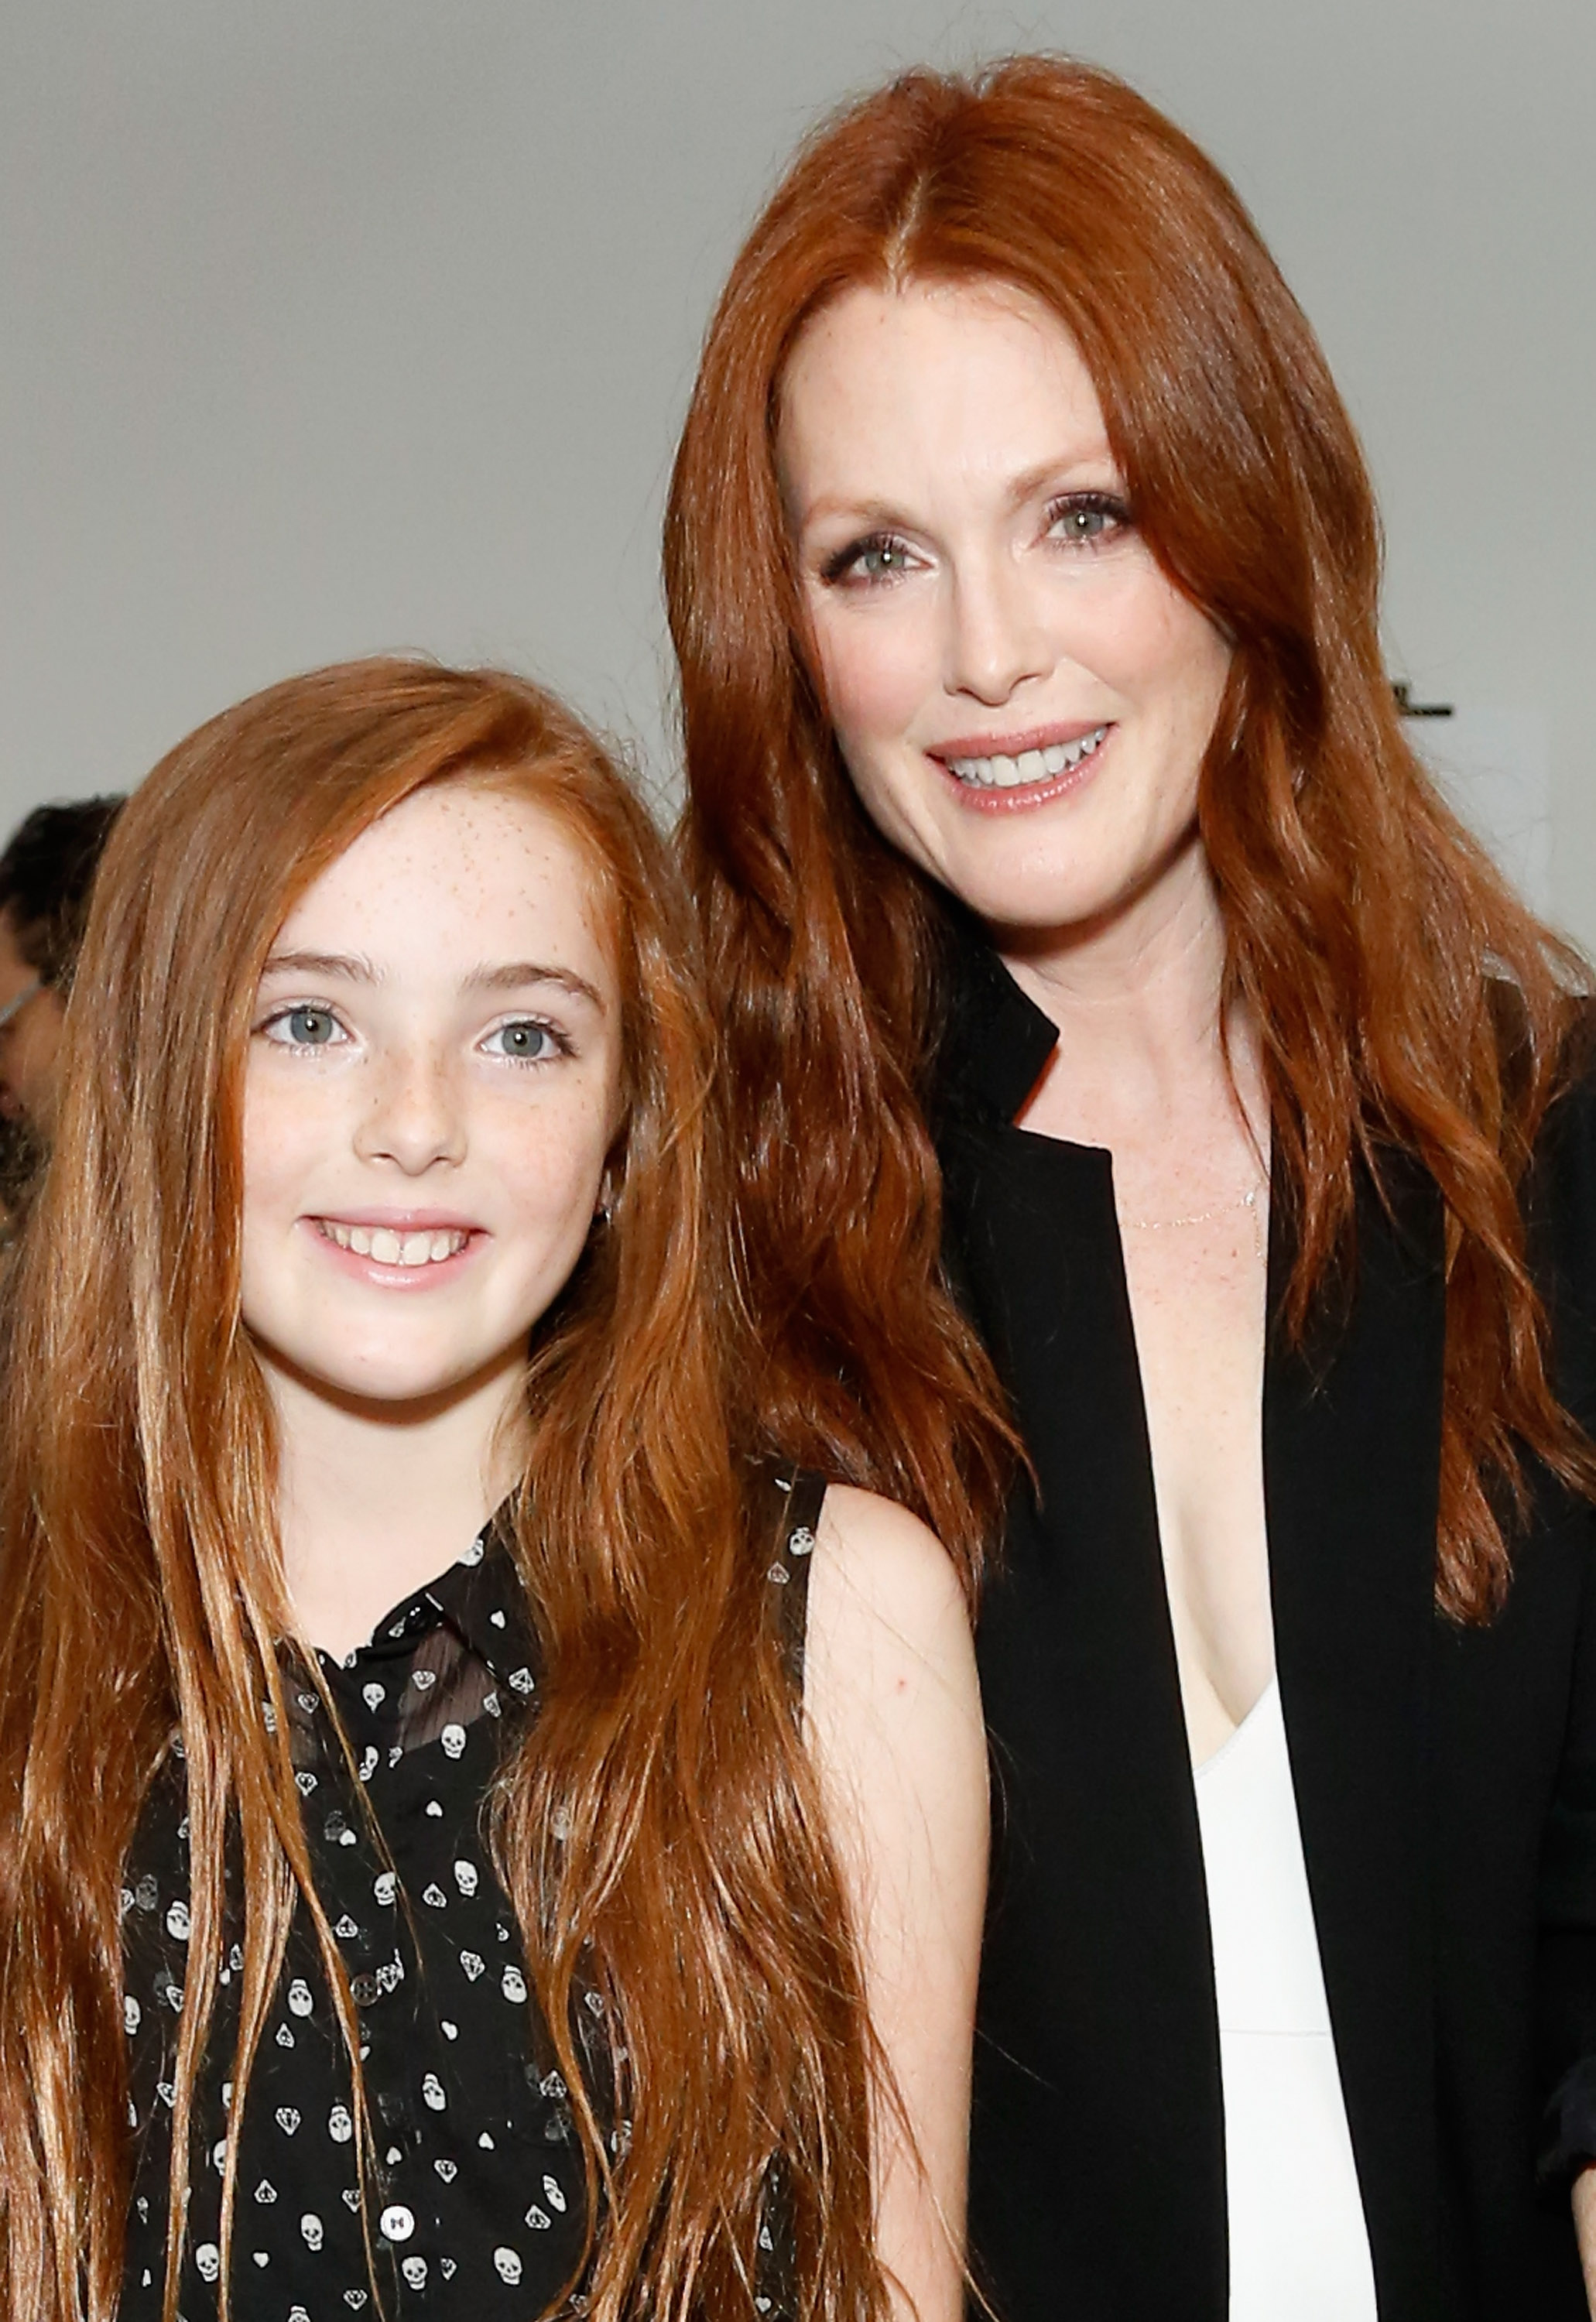 Julianne Moore and Liv Freundlich attend the Reed Krakoff fashion show on September 11, 2013 in New York City | Source: Getty Images